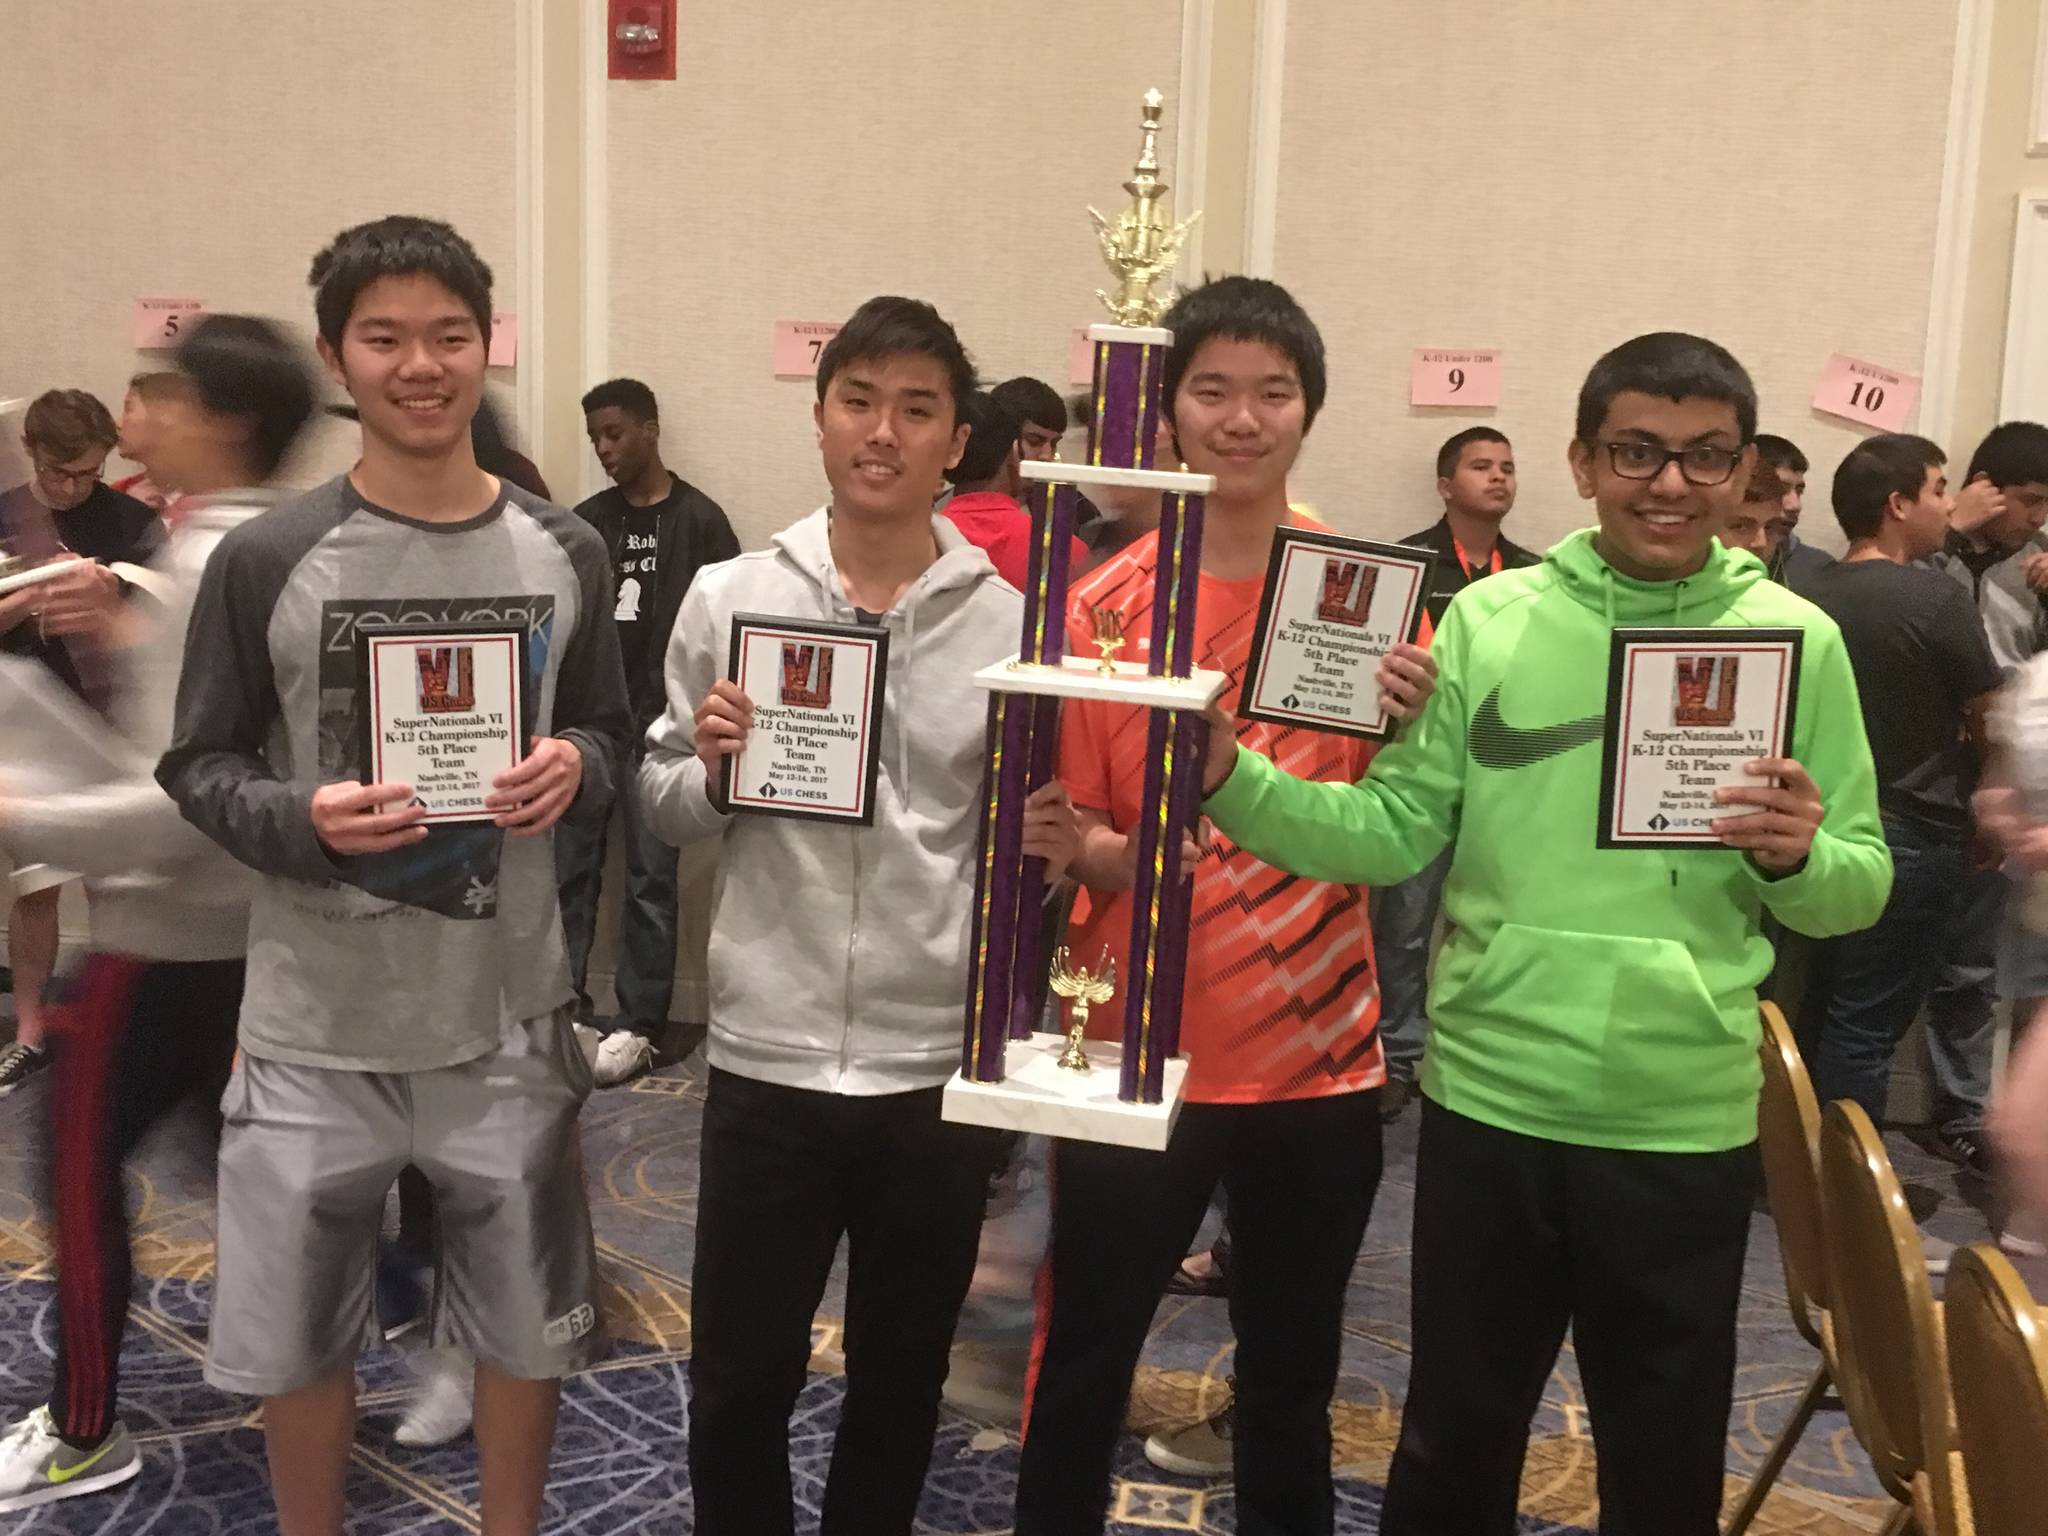 The four students from Redmond High School who competed in the U.S. Chess Federation national championship took home a fifth-place award last weekend. Contributed photo